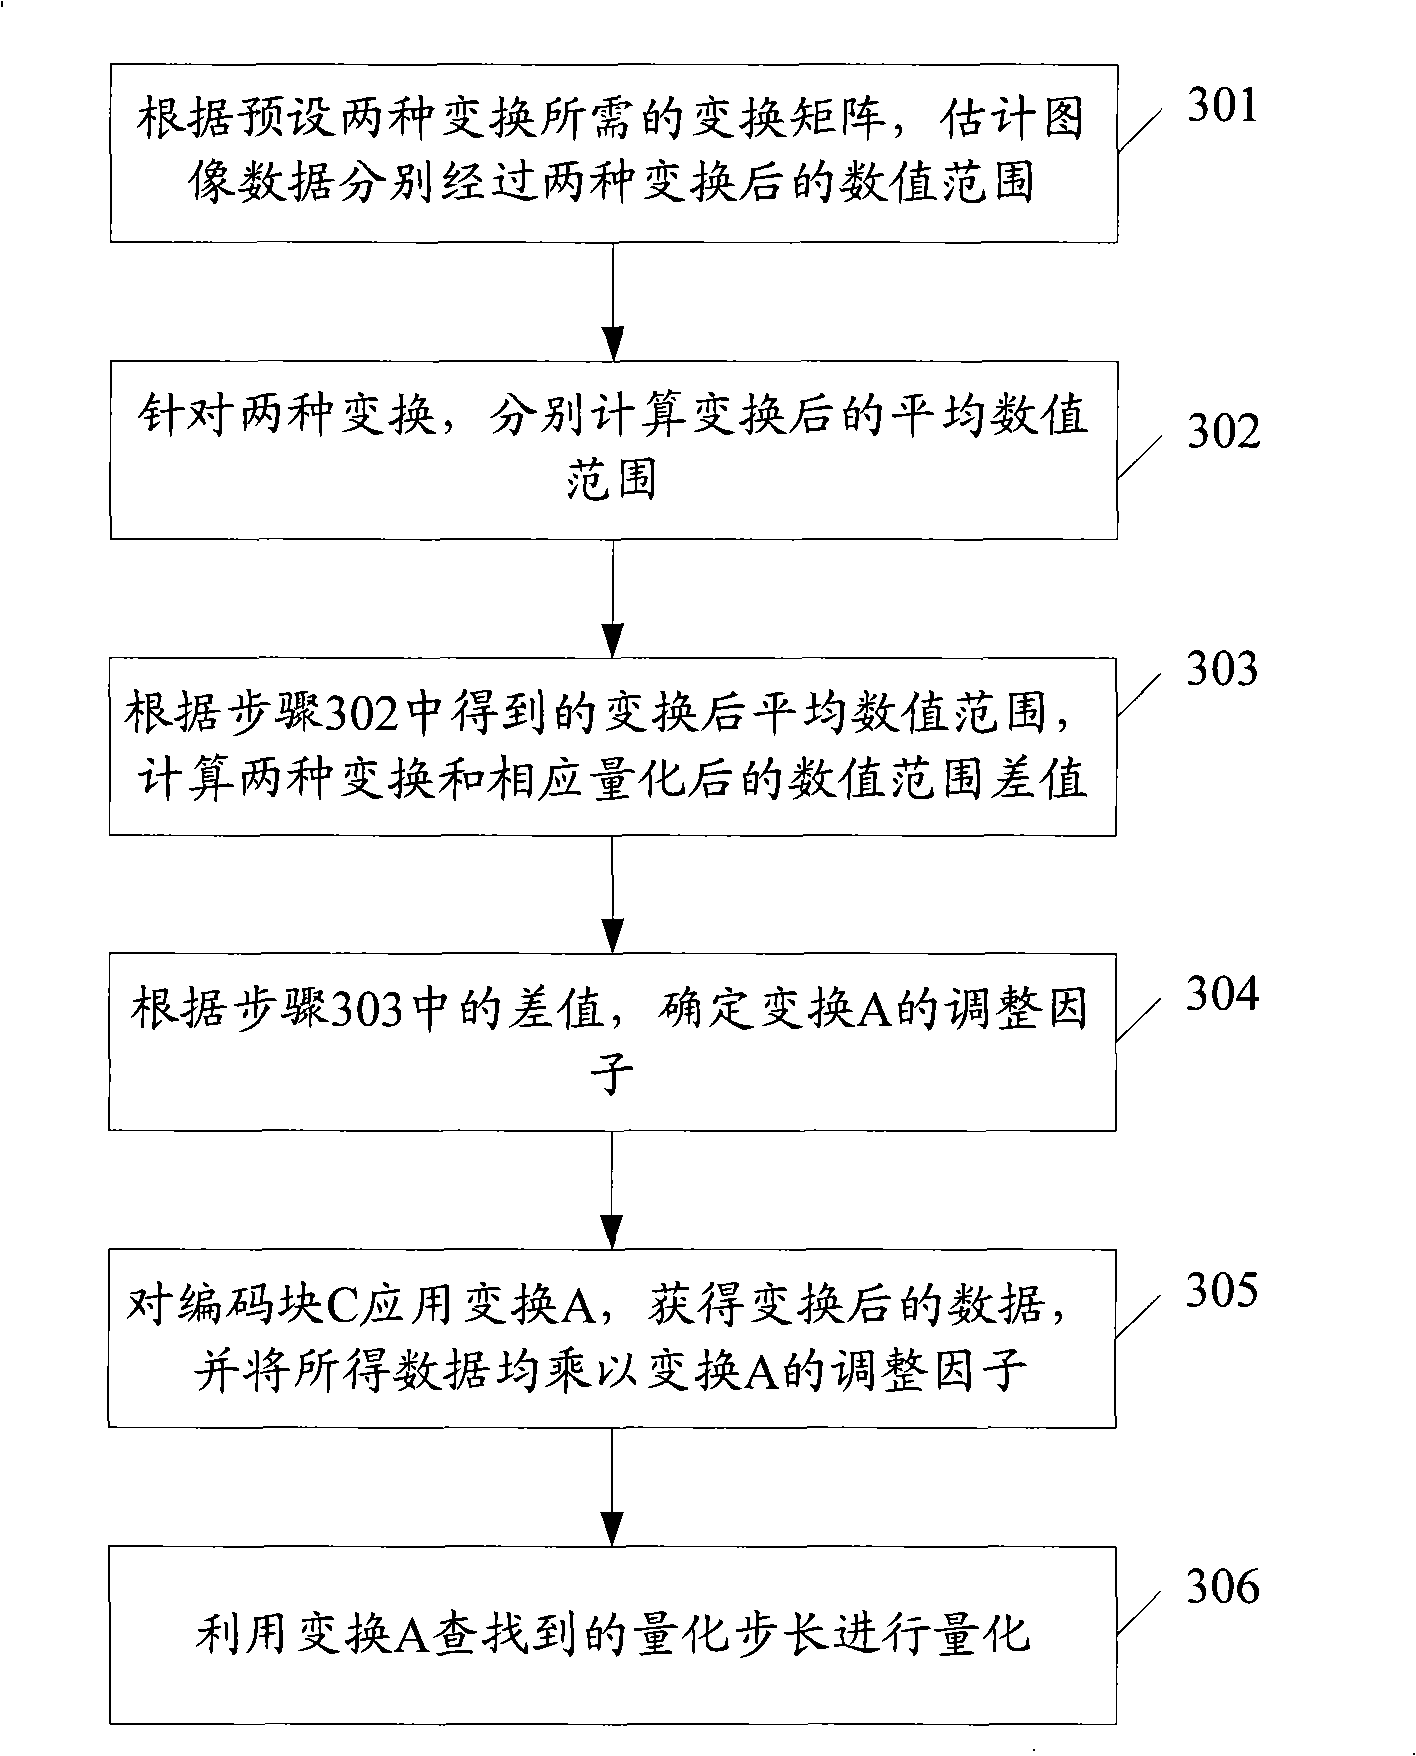 Method and apparatus for processing transformation data, method and apparatus for encoding and decoding